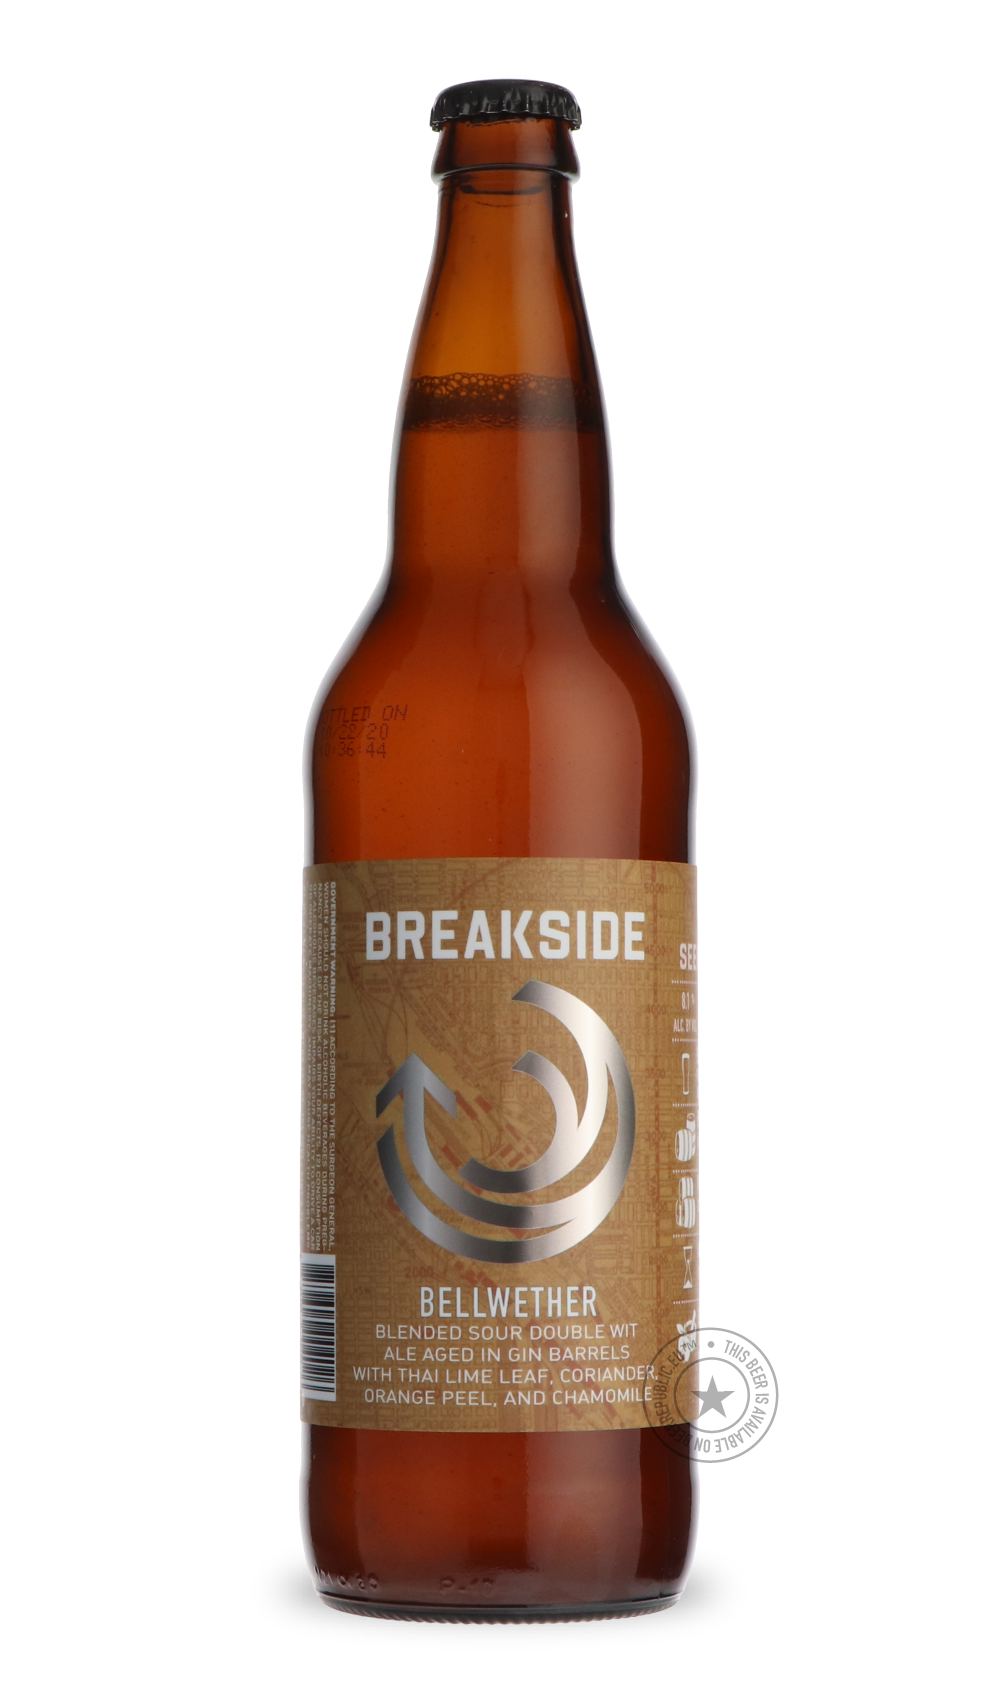 -Breakside- Bellwether-Pale- Only @ Beer Republic - The best online beer store for American & Canadian craft beer - Buy beer online from the USA and Canada - Bier online kopen - Amerikaans bier kopen - Craft beer store - Craft beer kopen - Amerikanisch bier kaufen - Bier online kaufen - Acheter biere online - IPA - Stout - Porter - New England IPA - Hazy IPA - Imperial Stout - Barrel Aged - Barrel Aged Imperial Stout - Brown - Dark beer - Blond - Blonde - Pilsner - Lager - Wheat - Weizen - Amber - Barley Wi